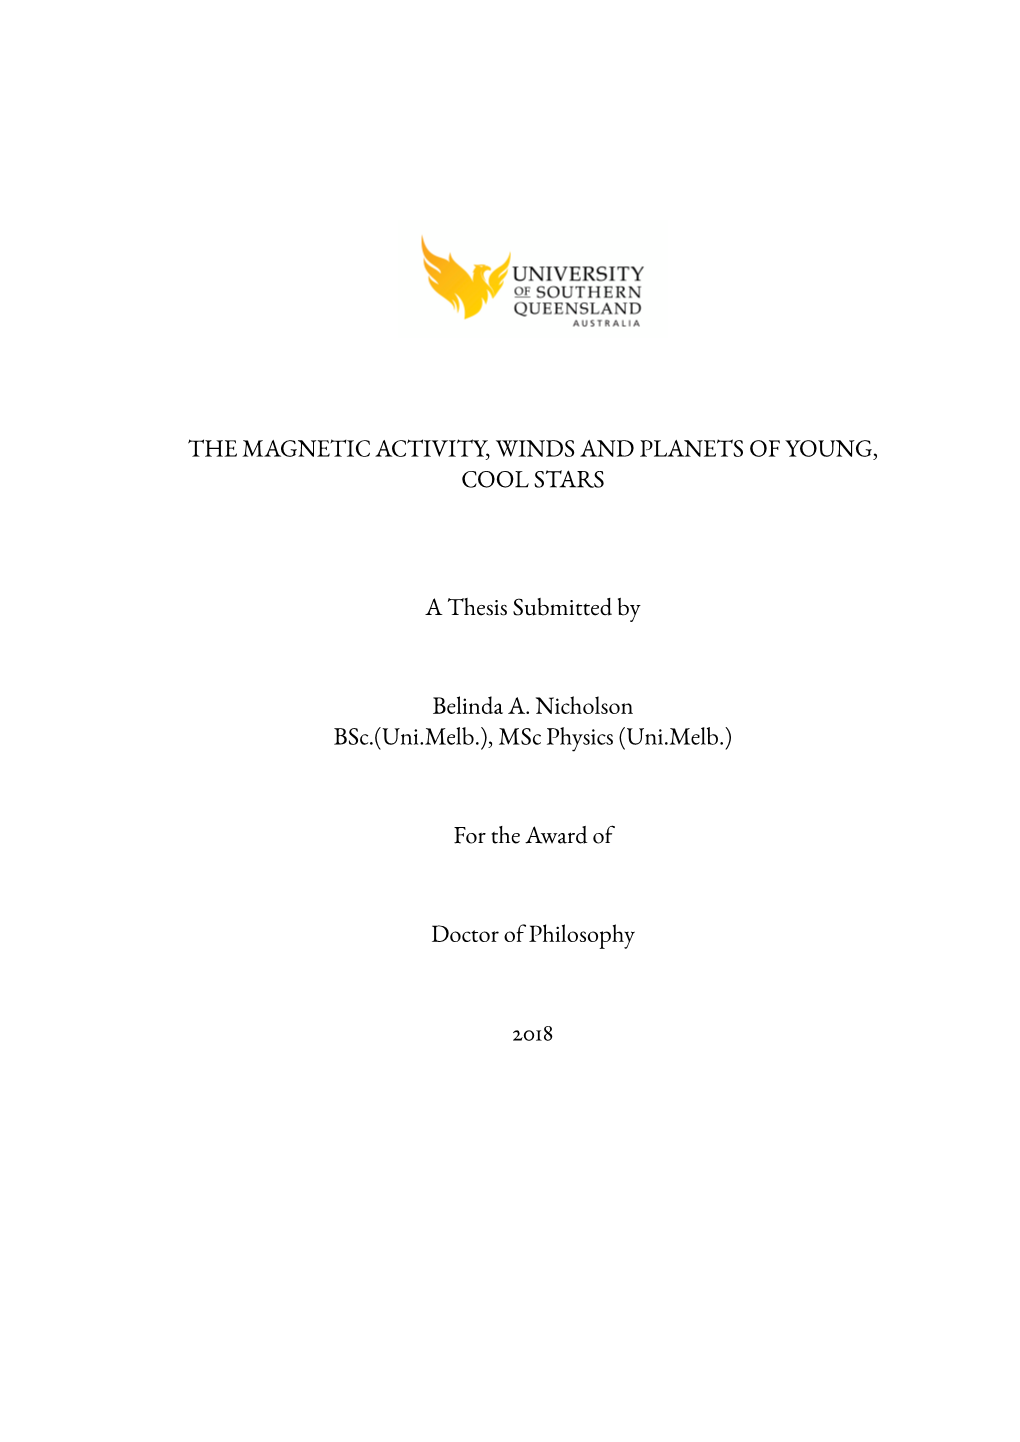 THE MAGNETIC ACTIVITY, WINDS and PLANETS of YOUNG, COOL STARS a Thesis Submitted by Belinda A. Nicholson Bsc.(Uni.Melb.), Msc Ph